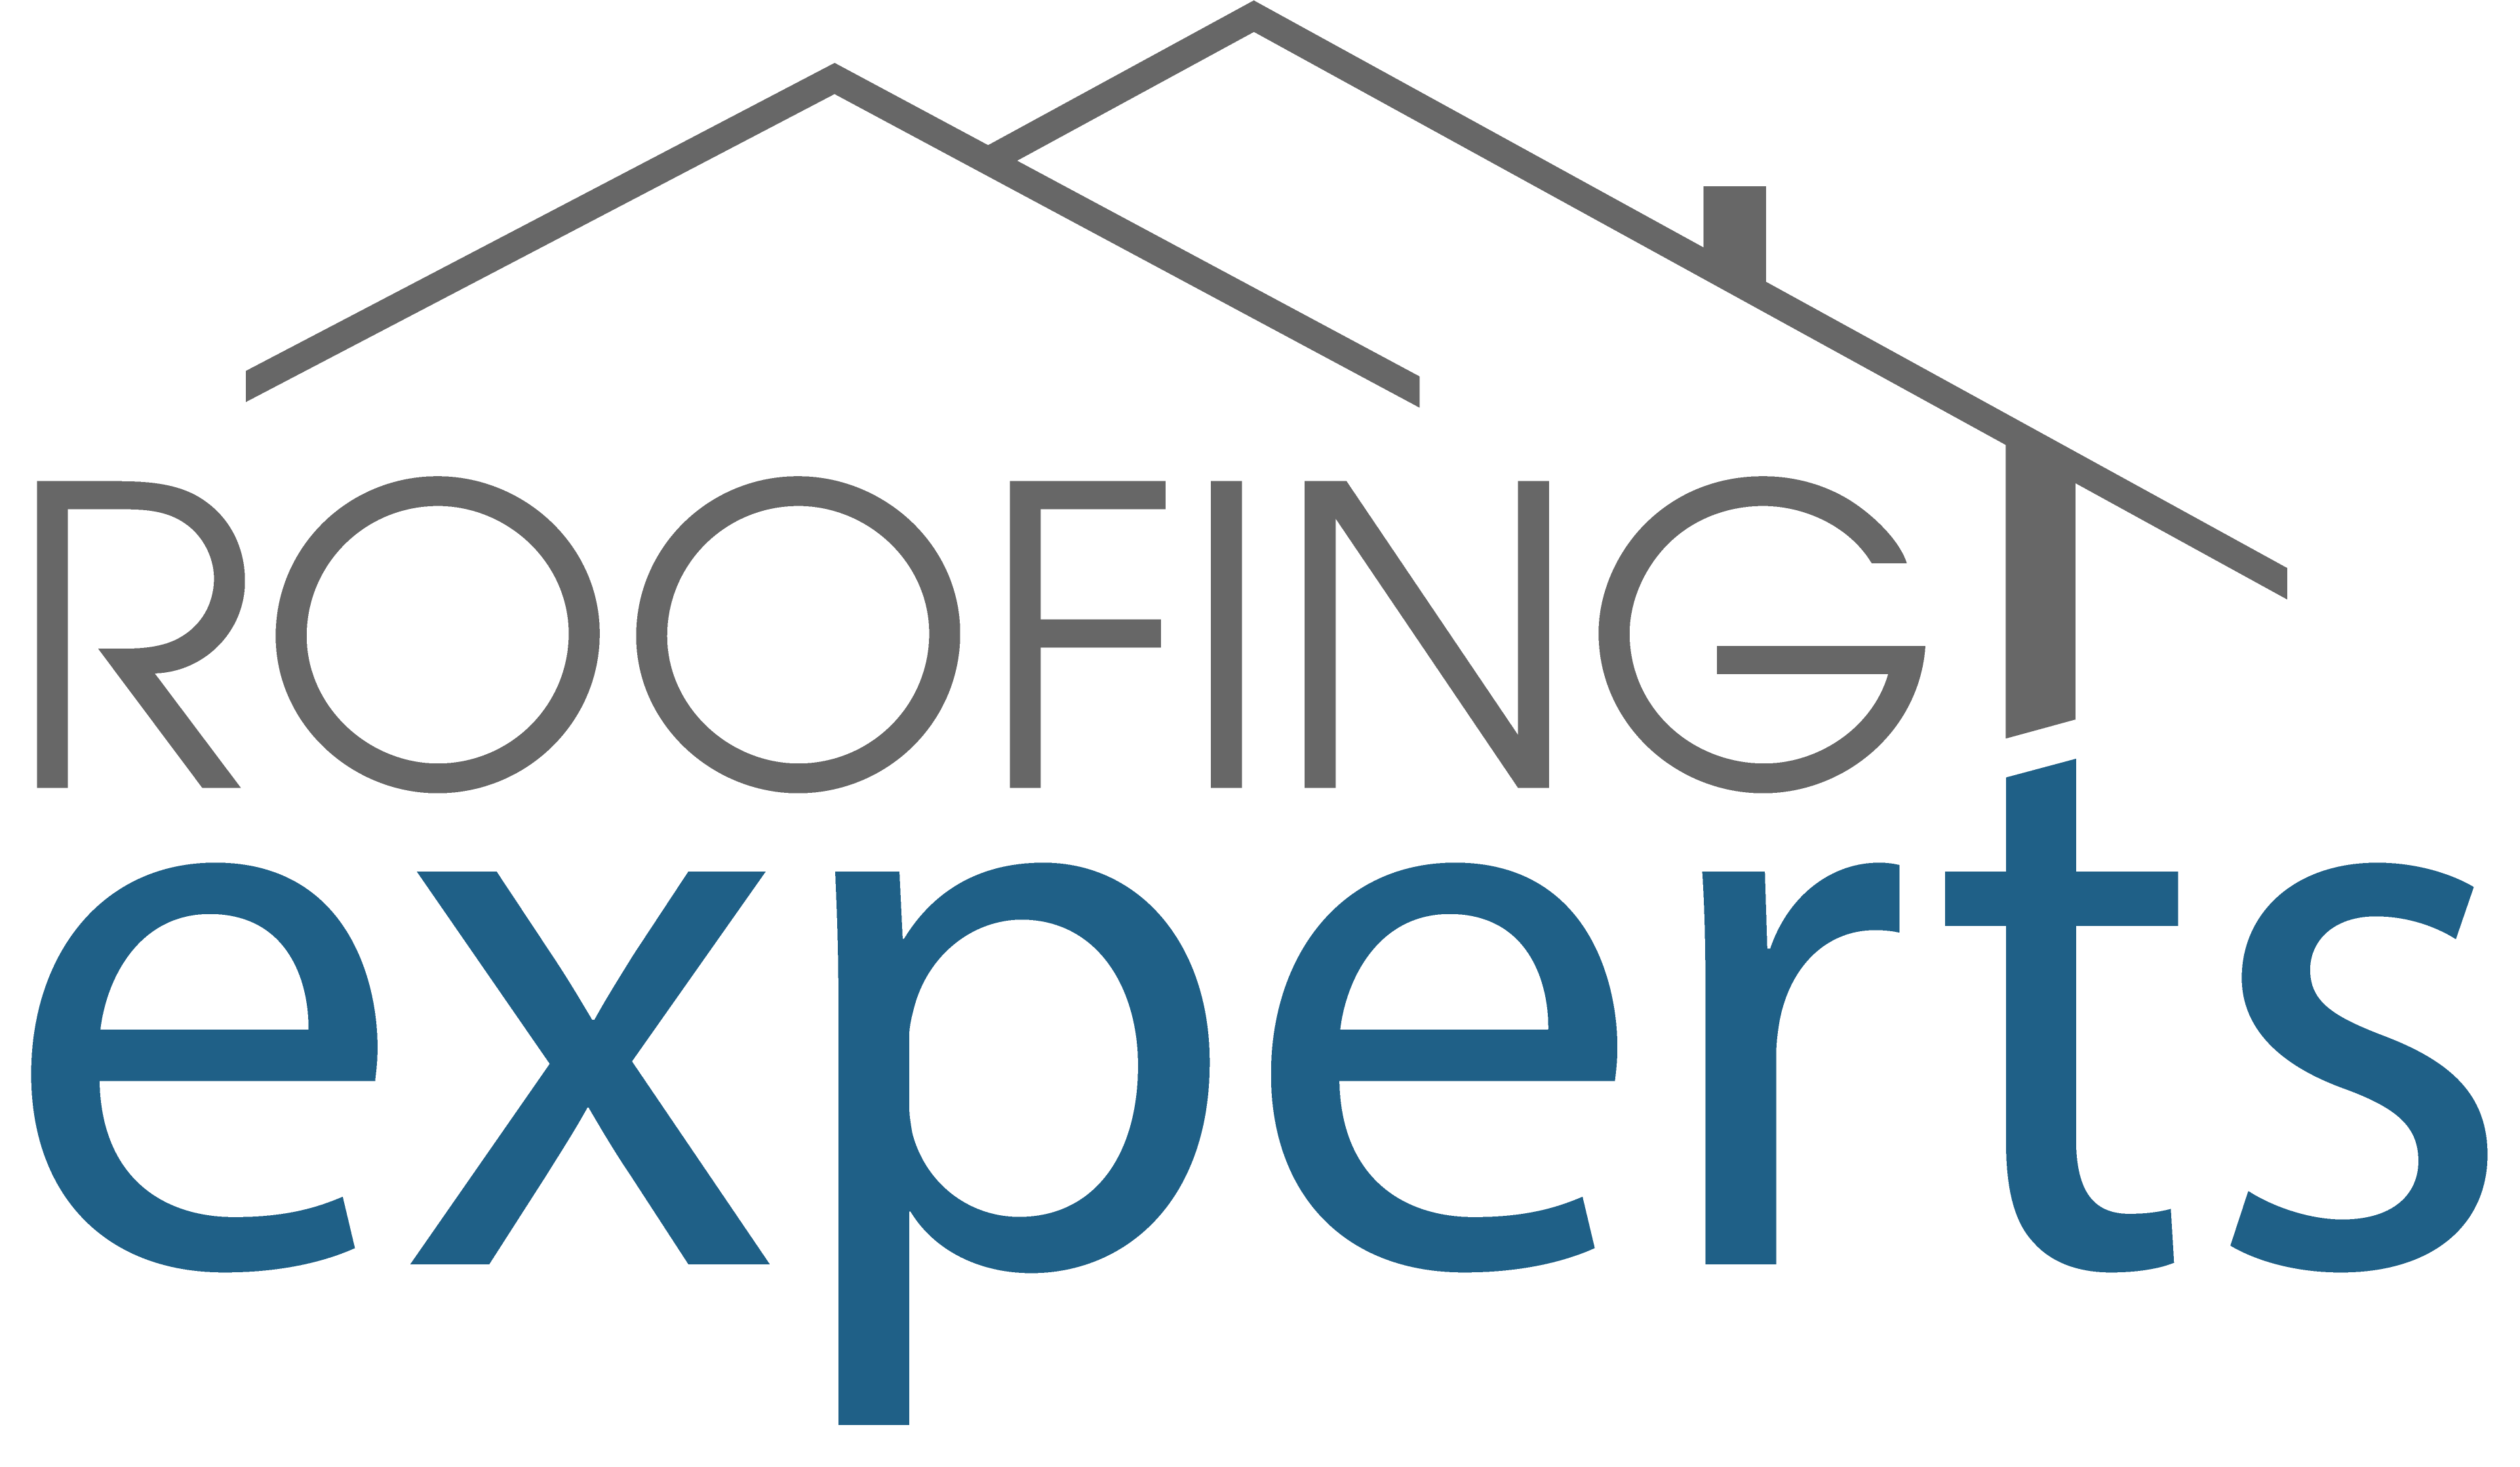 Roofing Experts - roofing company serving Upstate South Carolina